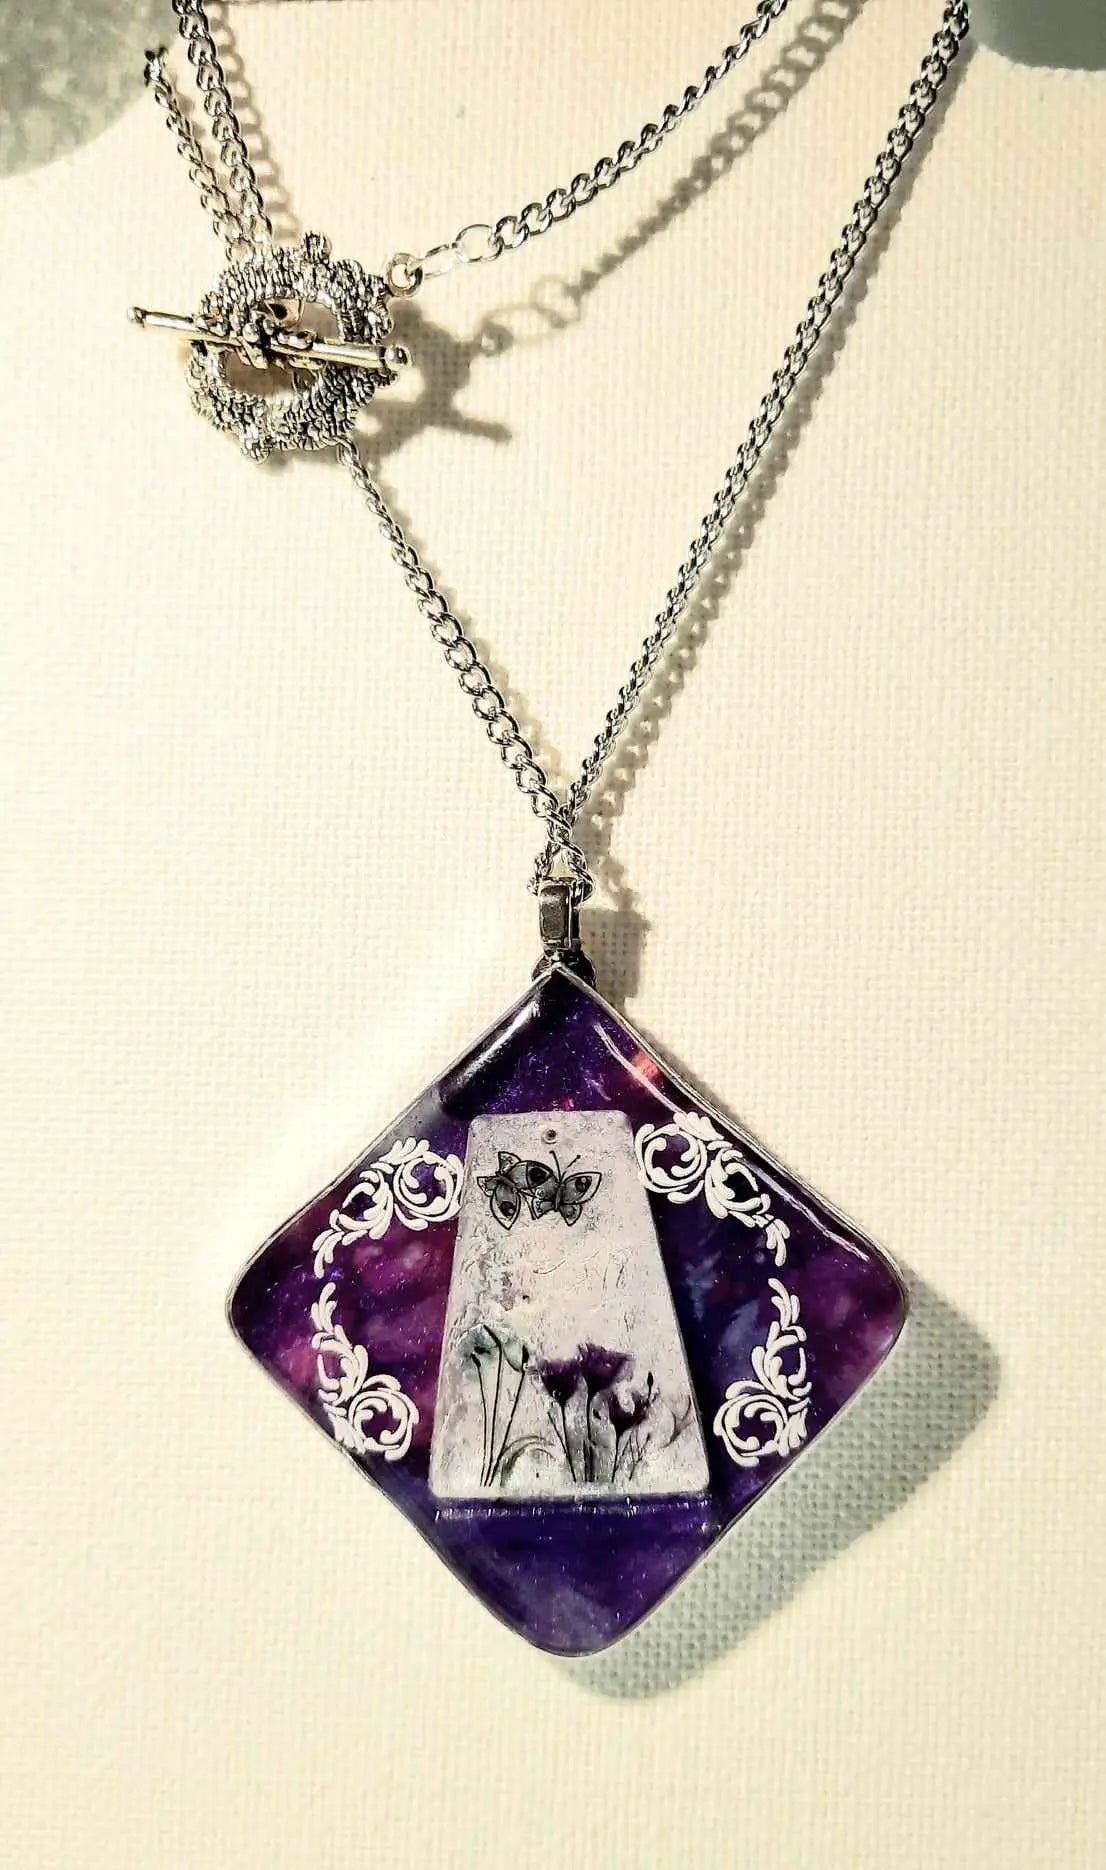 Reversible handcrafted by Josie purple colors pendant necklace - Image #2